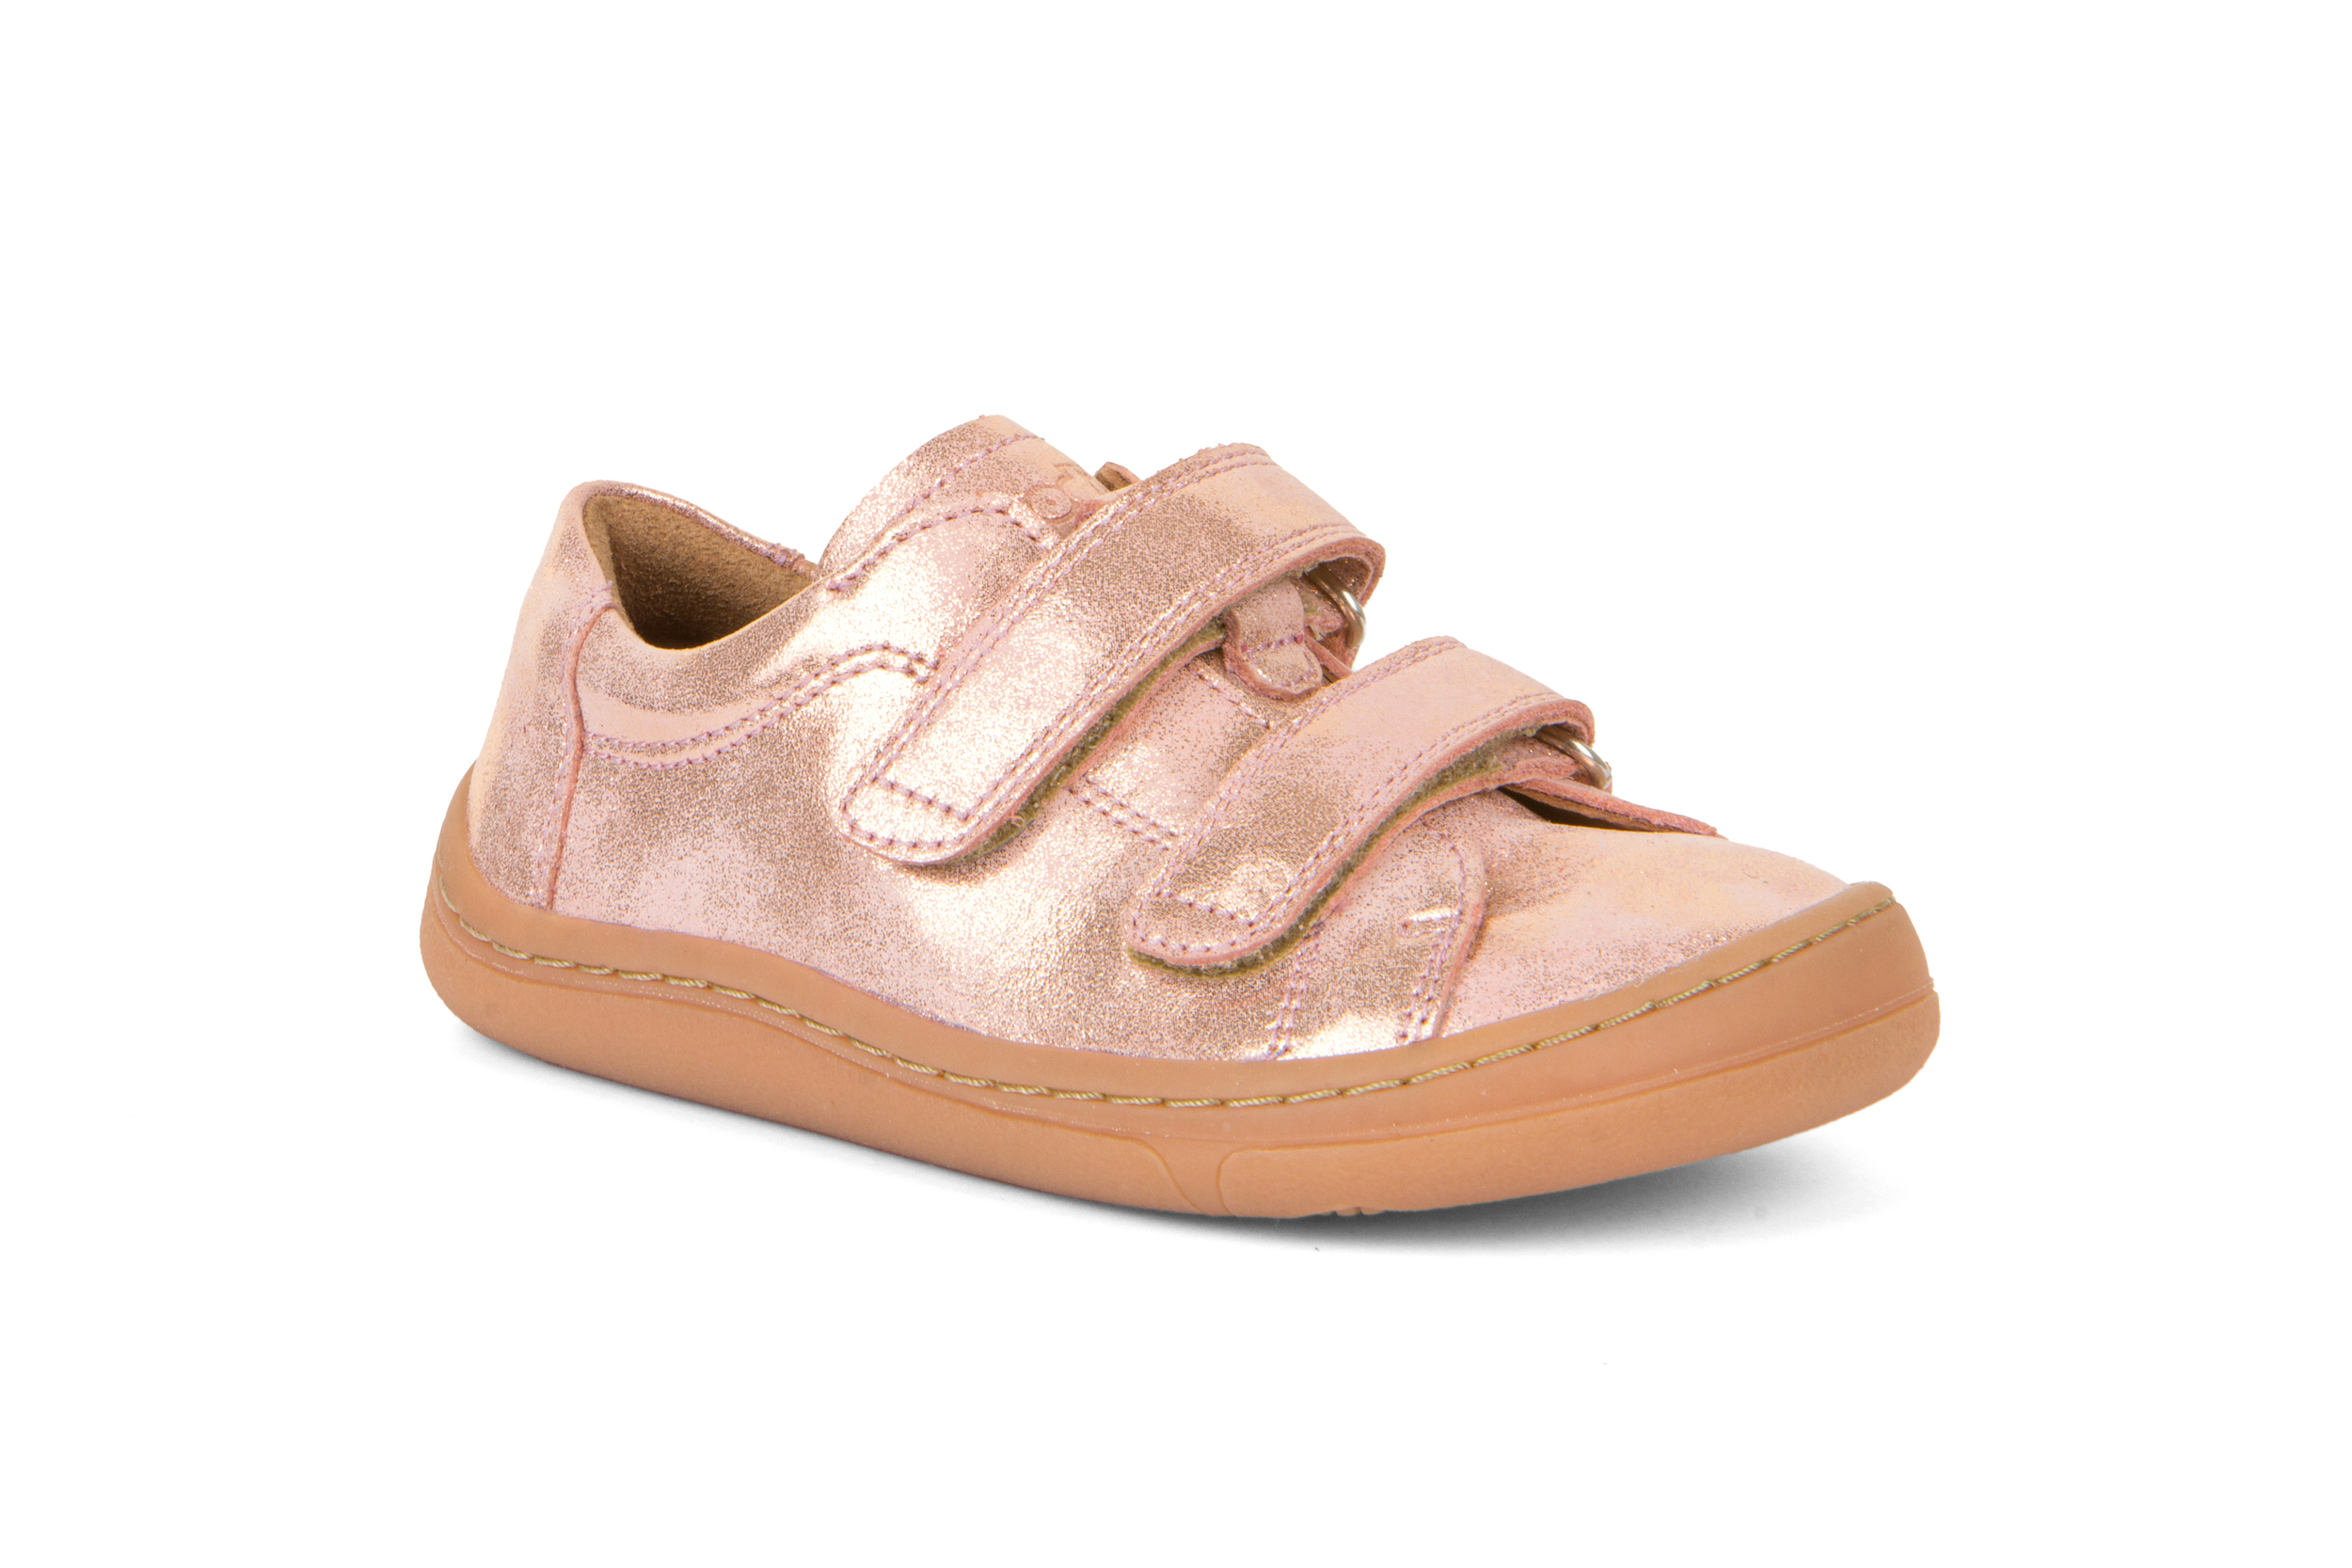 sneakers cuir froddo barefoot pink gold G3130225-11 sur la boutique liberty pieds-4